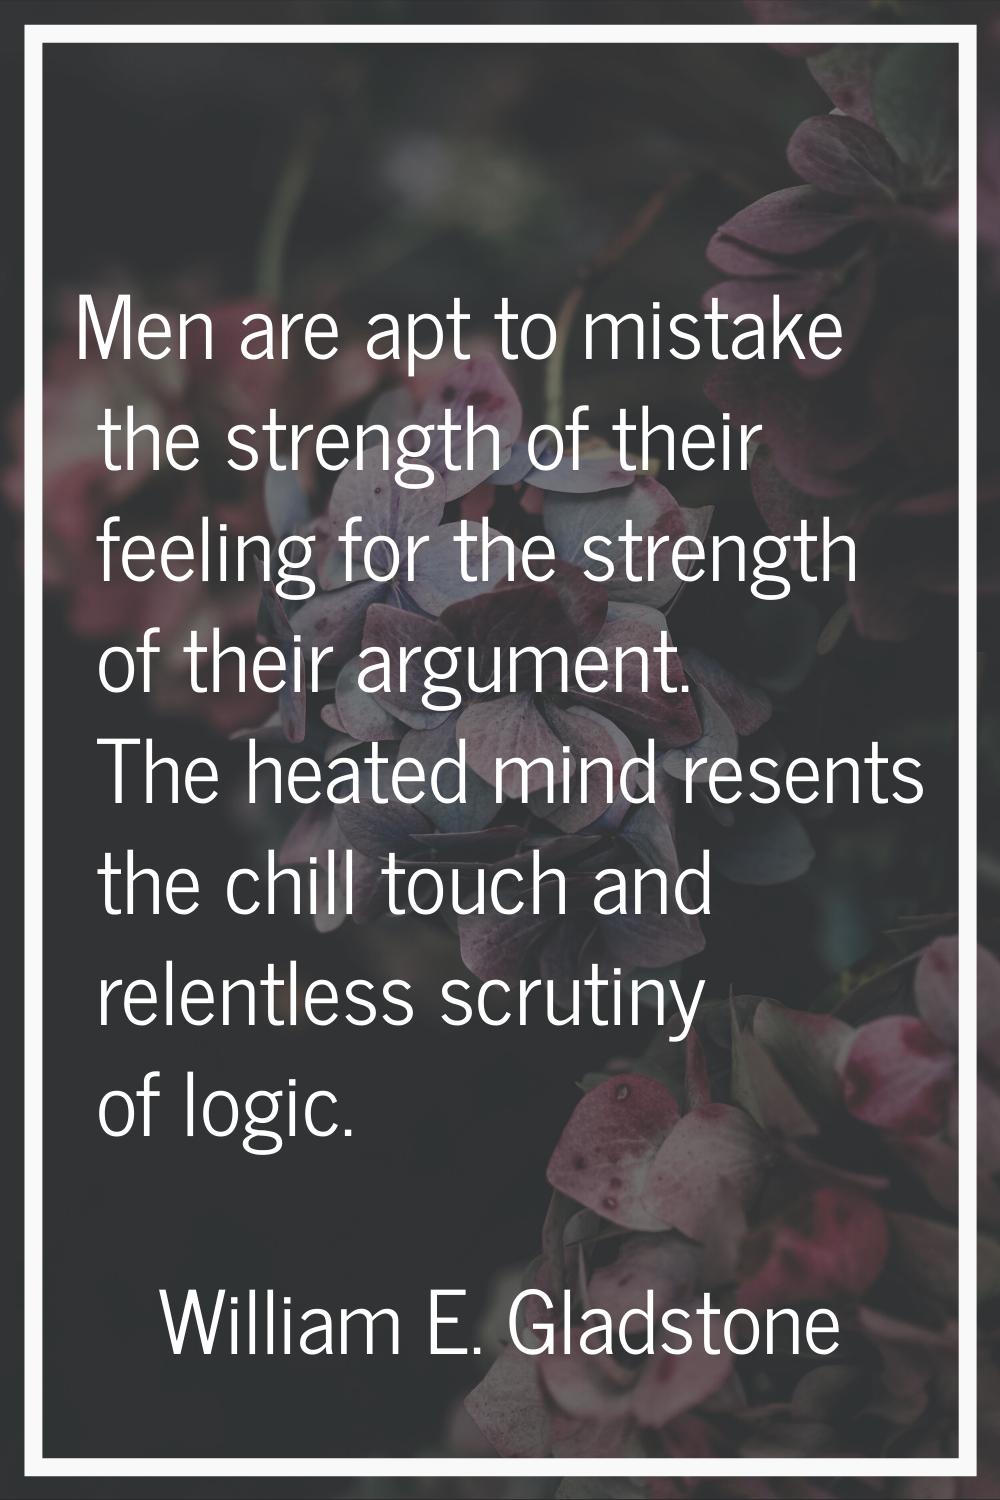 Men are apt to mistake the strength of their feeling for the strength of their argument. The heated